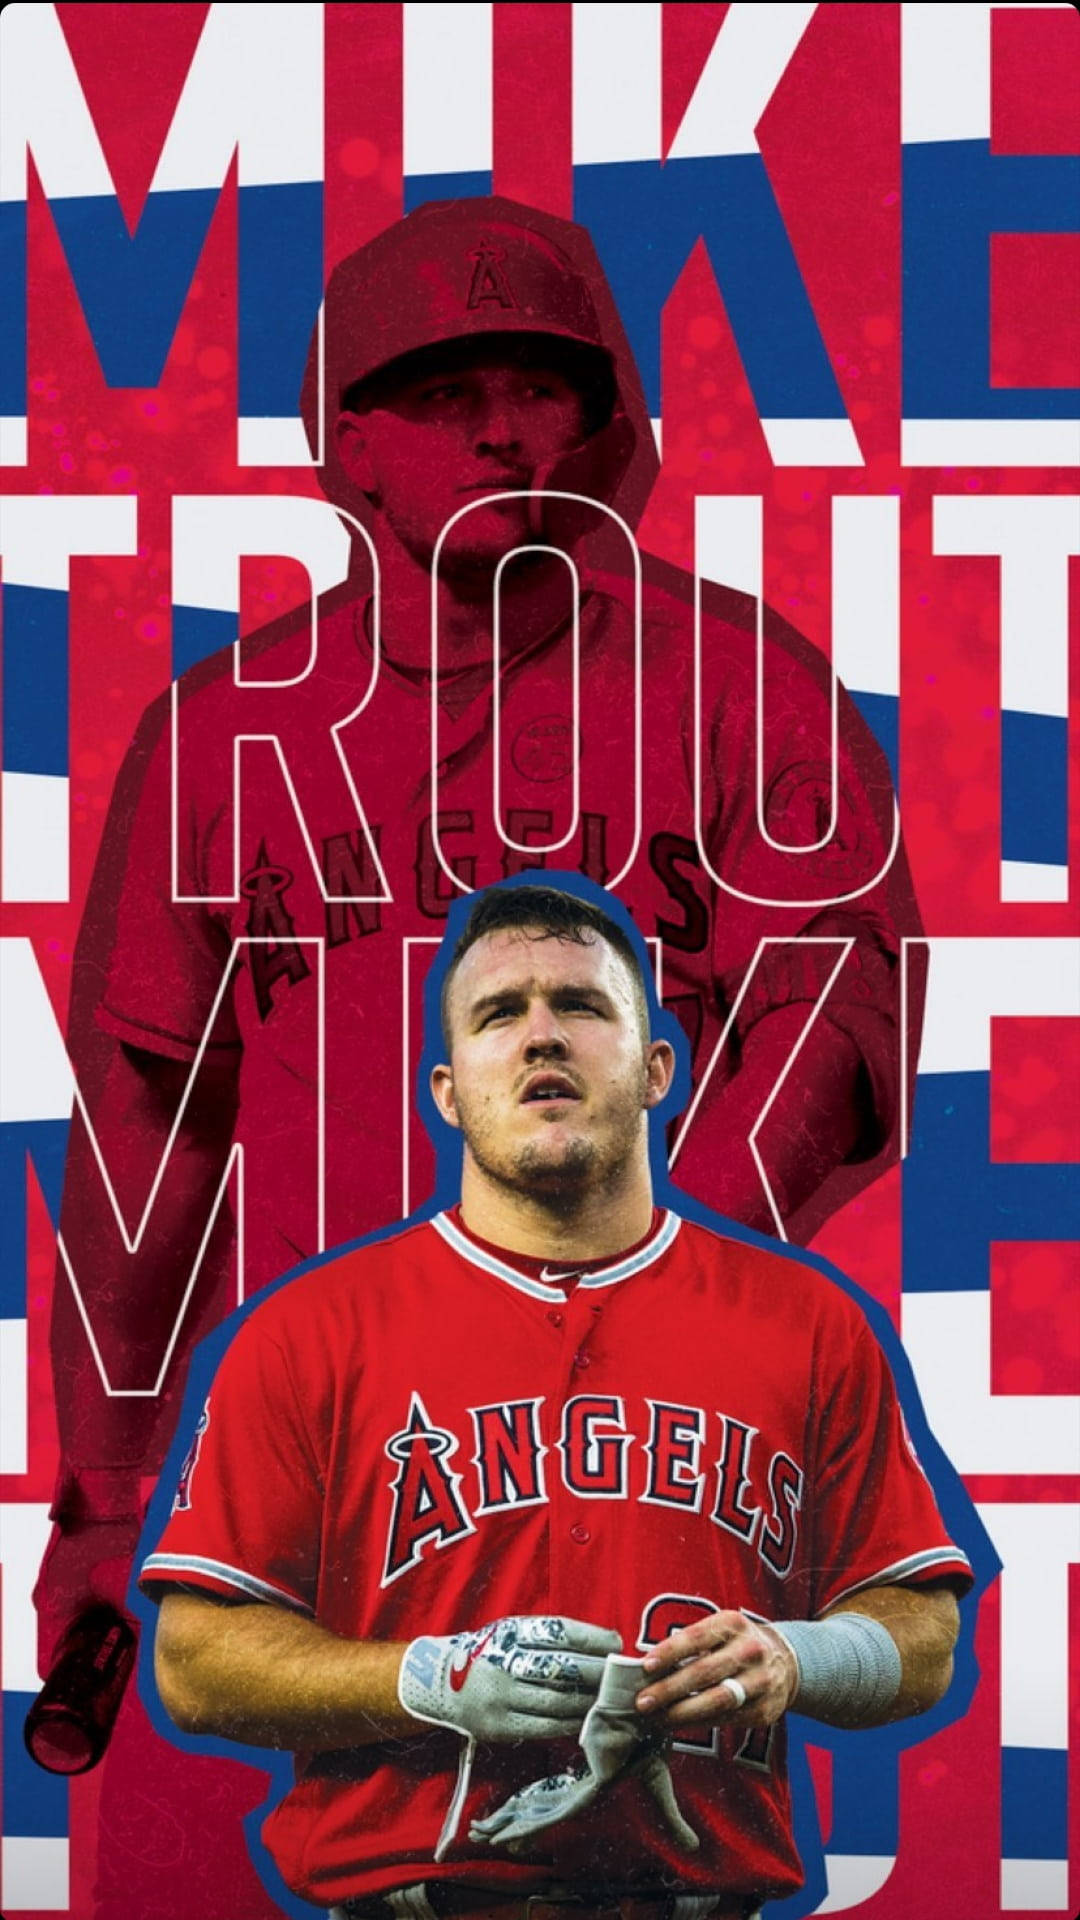 Mike Trout Number 27